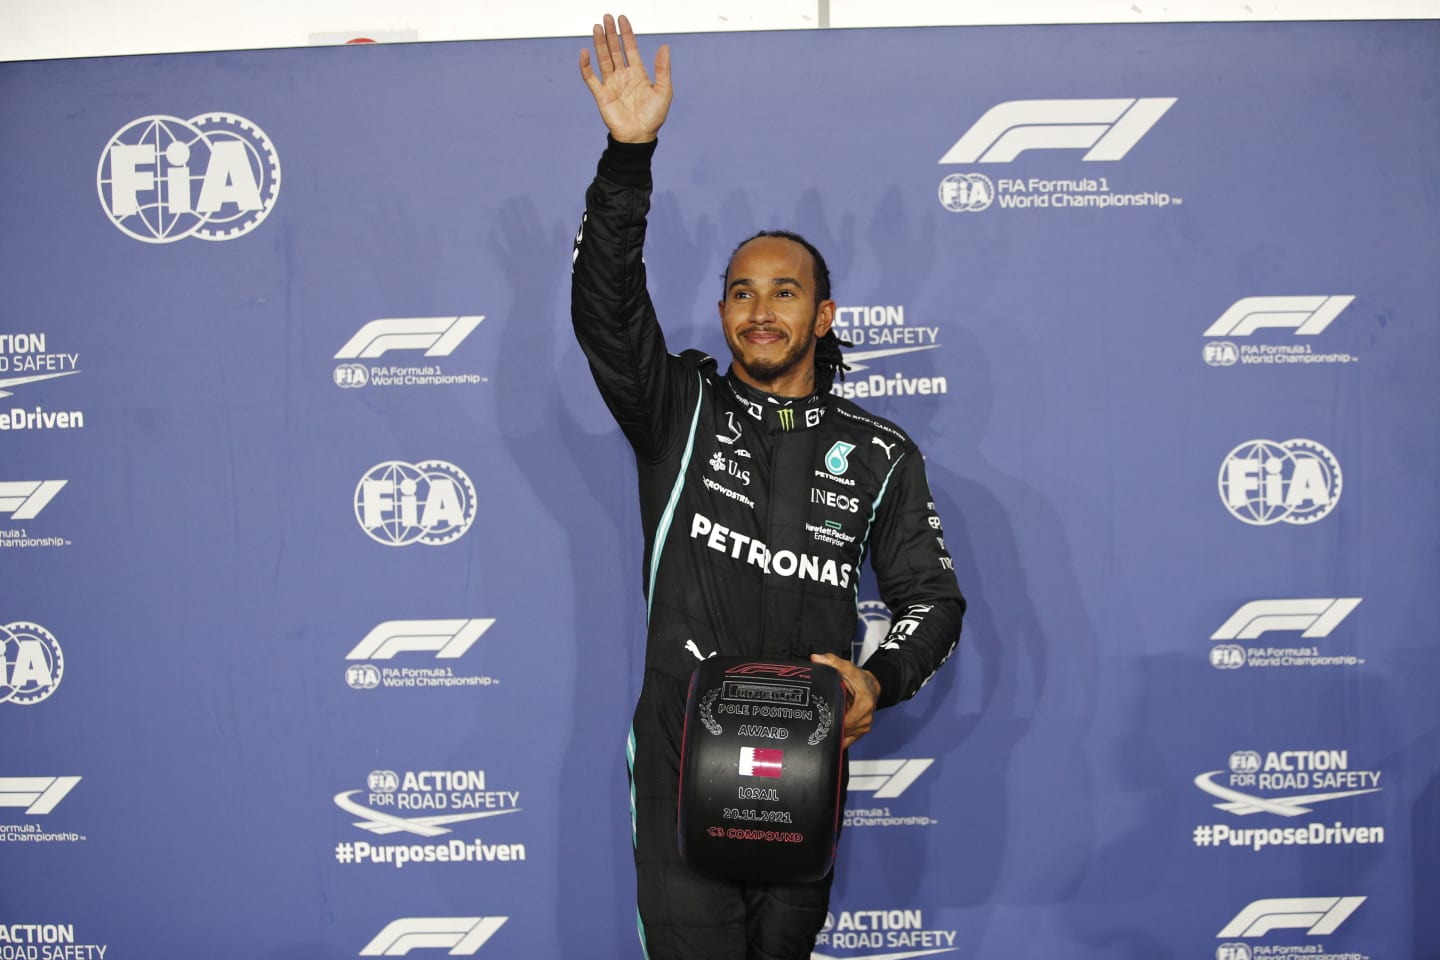 DOHA, QATAR - NOVEMBER 20: Pole position qualifier Lewis Hamilton of Great Britain and Mercedes GP waves to the crowd in parc ferme during qualifying ahead of the F1 Grand Prix of Qatar at Losail International Circuit on November 20, 2021 in Doha, Qatar. (Photo by Hamad I Mohammed - Pool/Getty Images)